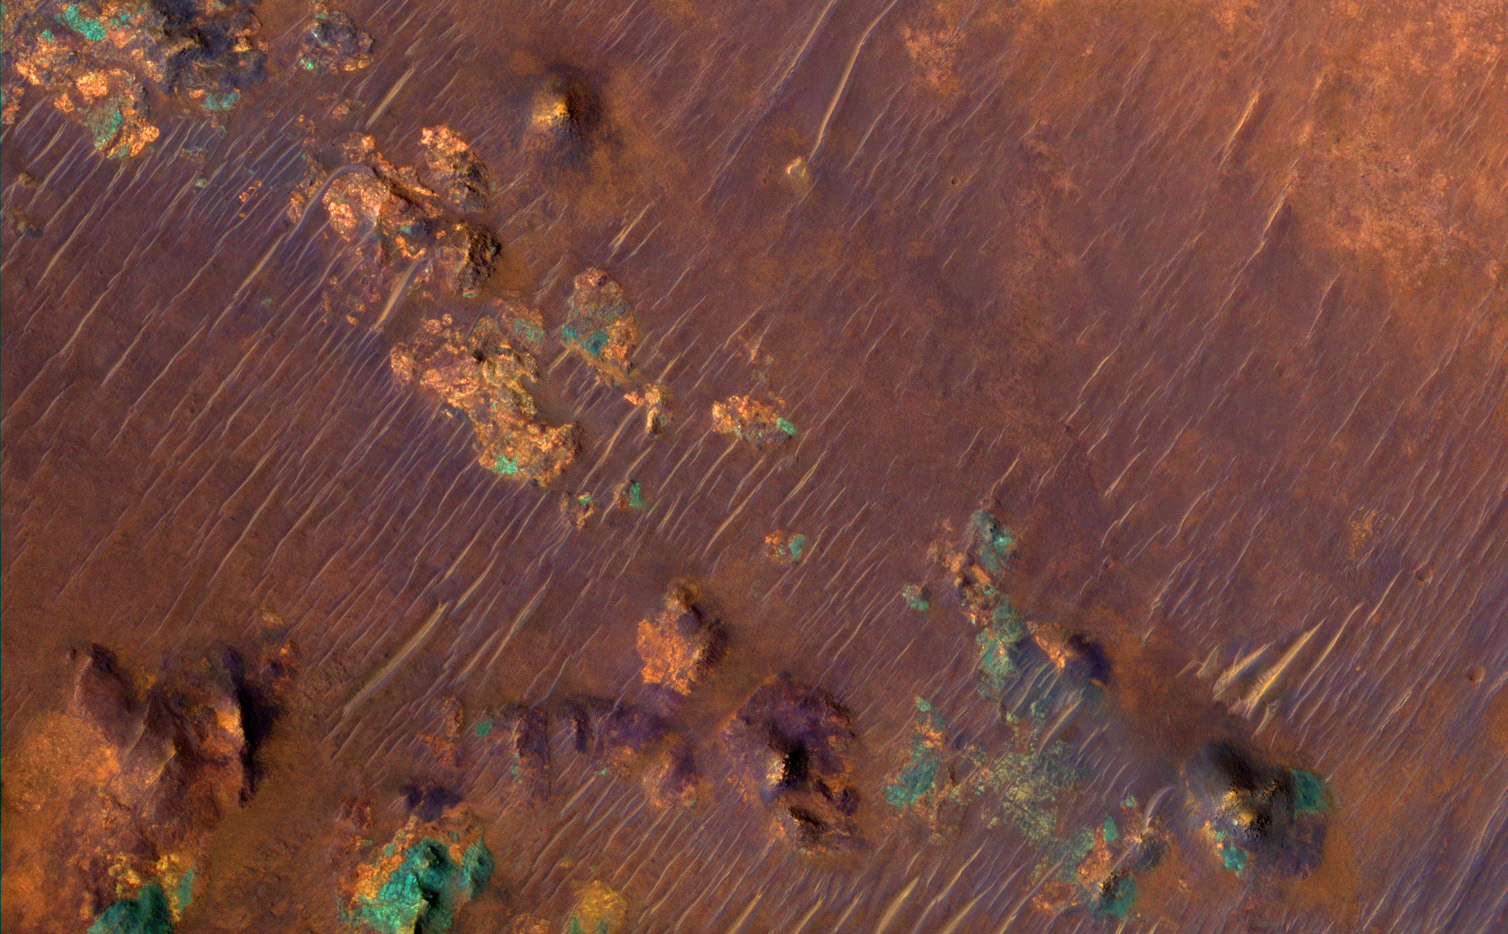 Color Image of Nili Fossae Trough, a Candidate MSL Landing Site